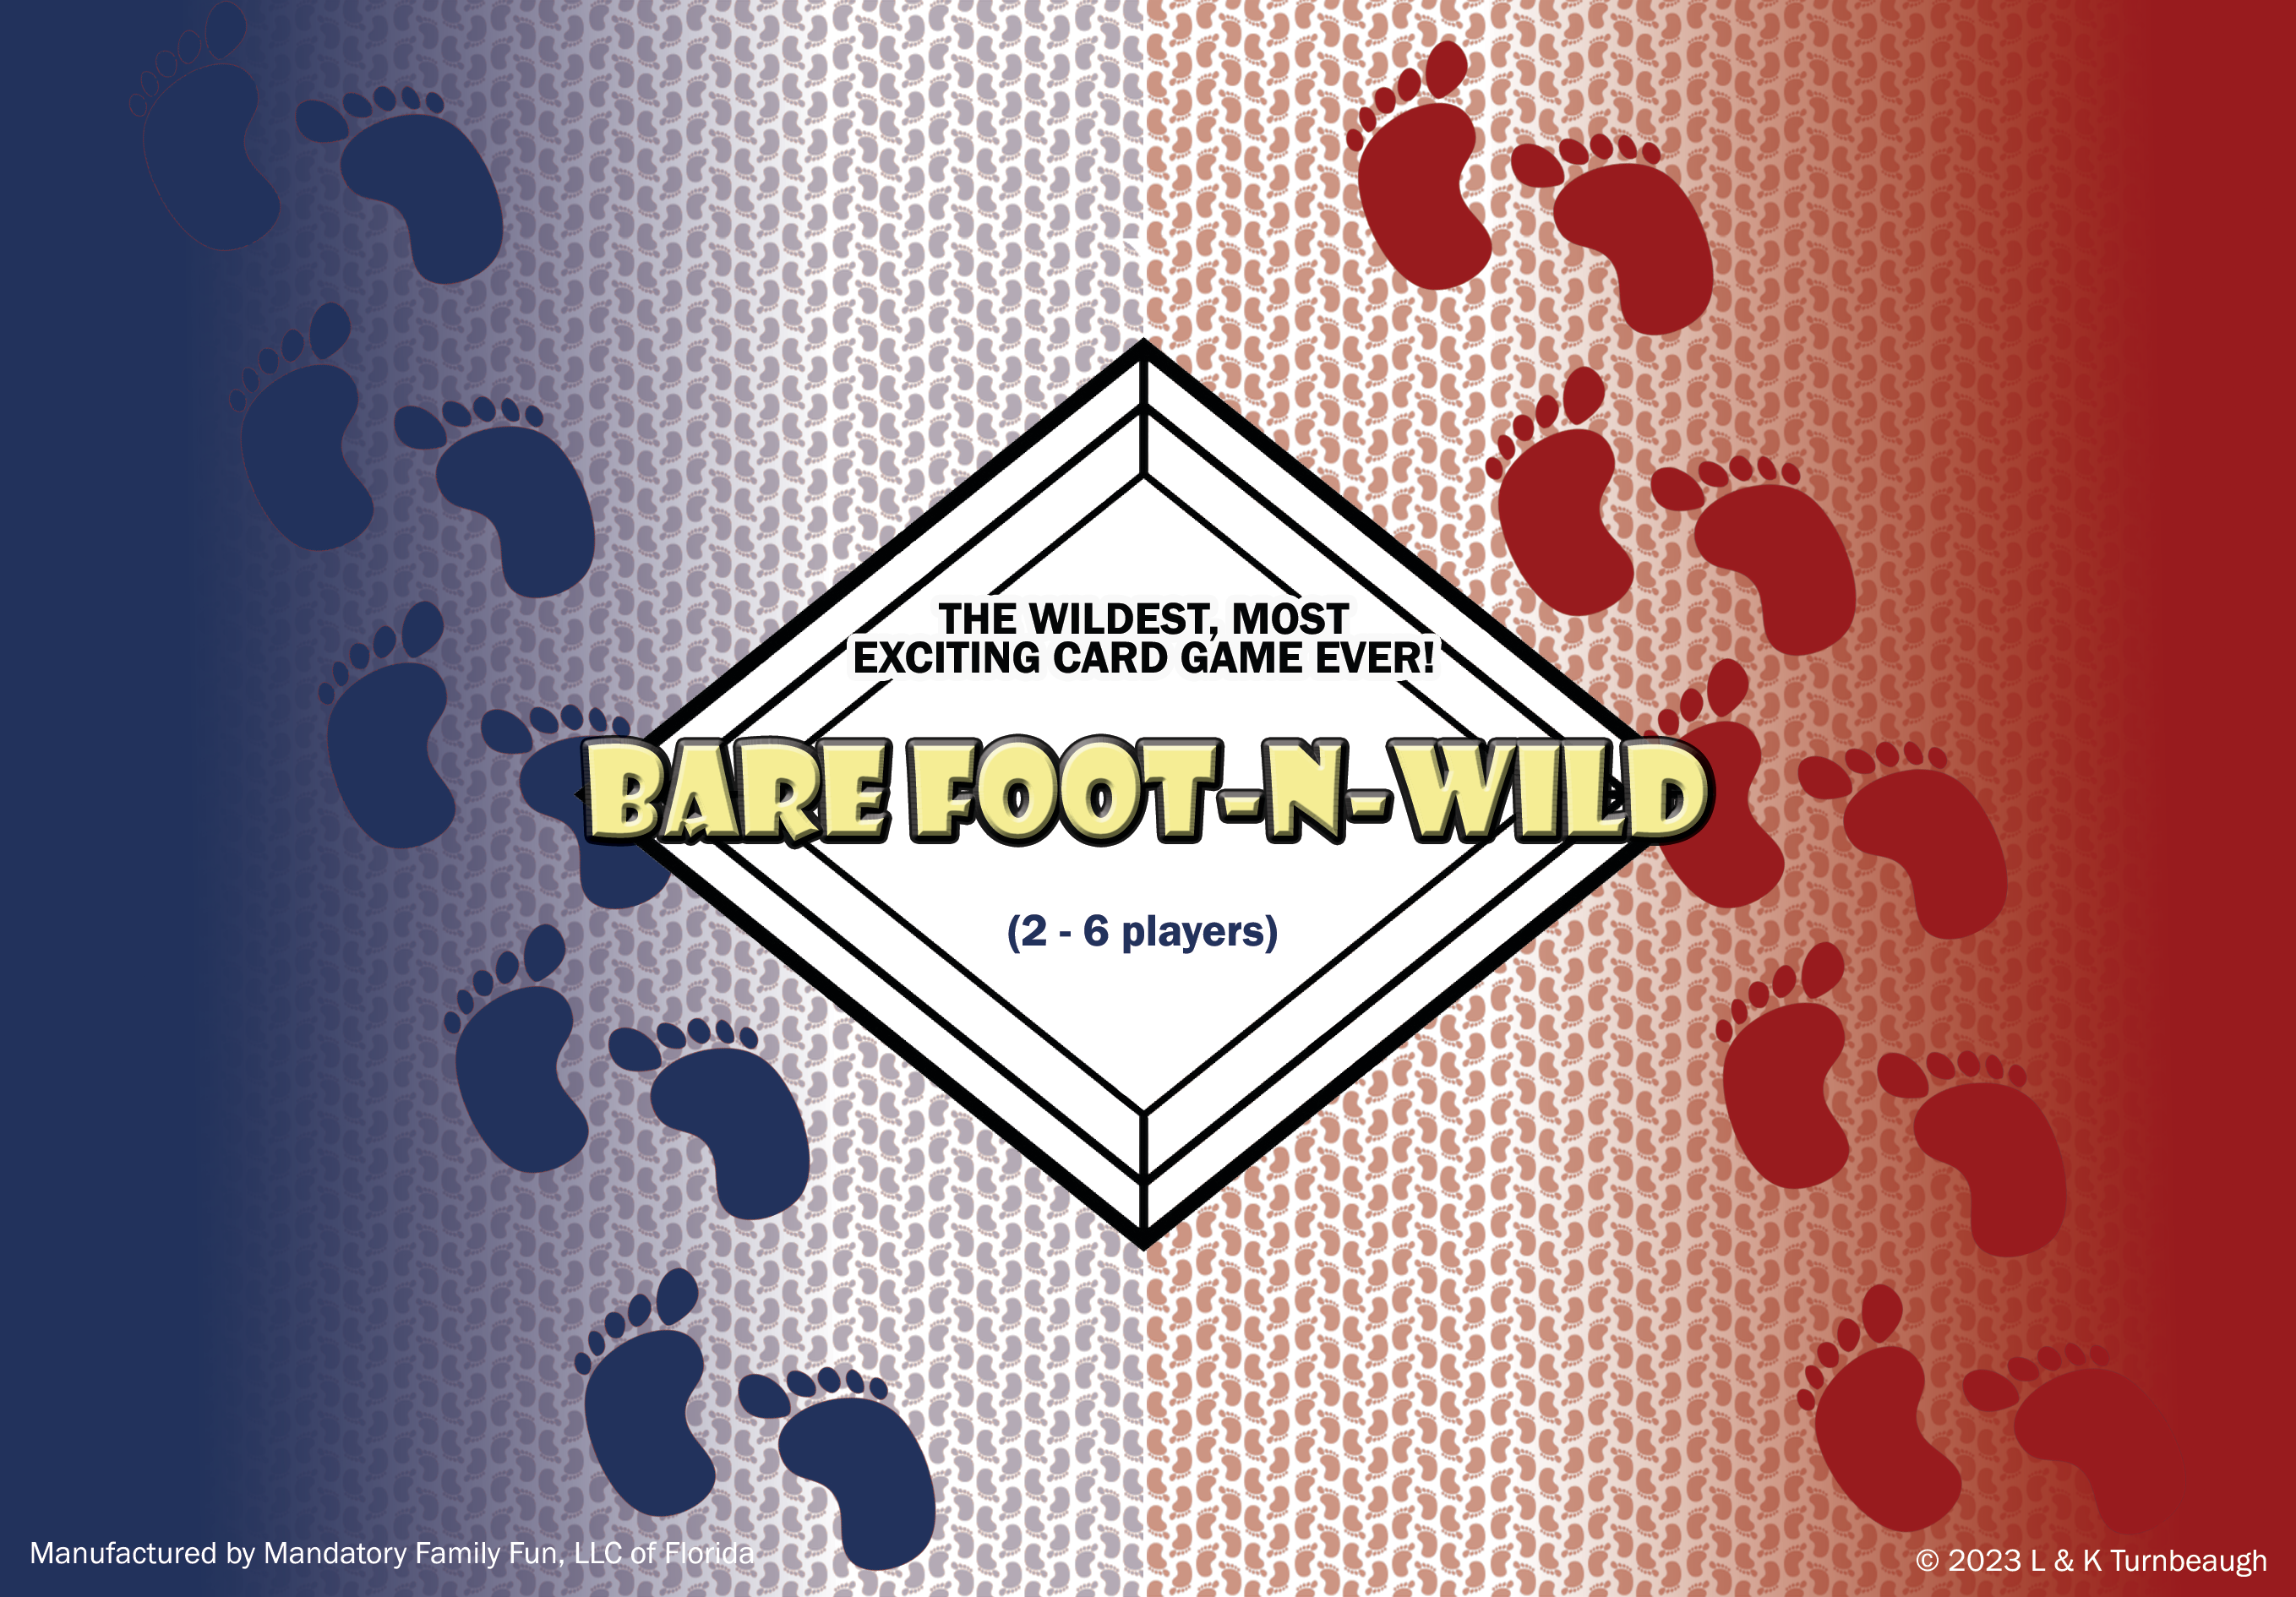 Bare Foot -N- Wild Rules